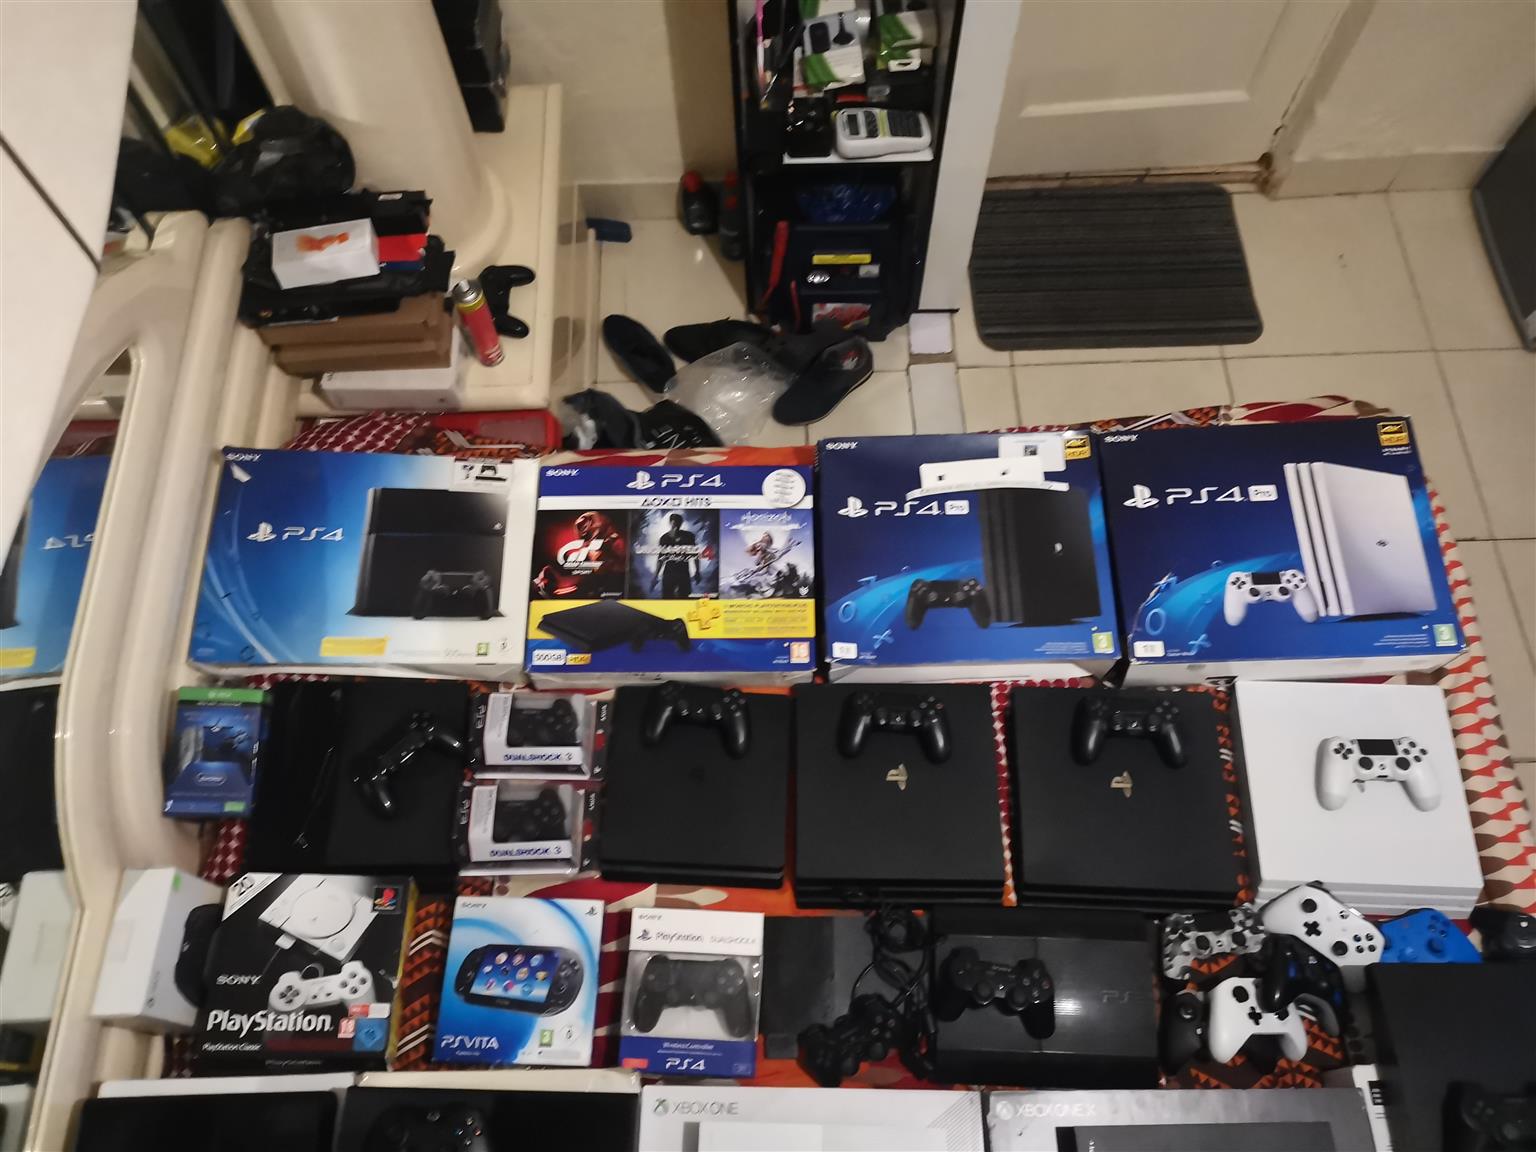 All Gaming Consoles JHB 2022 Pricelist Ps4 R4500 Ps4 slim R4999 Ps4 pro R6500